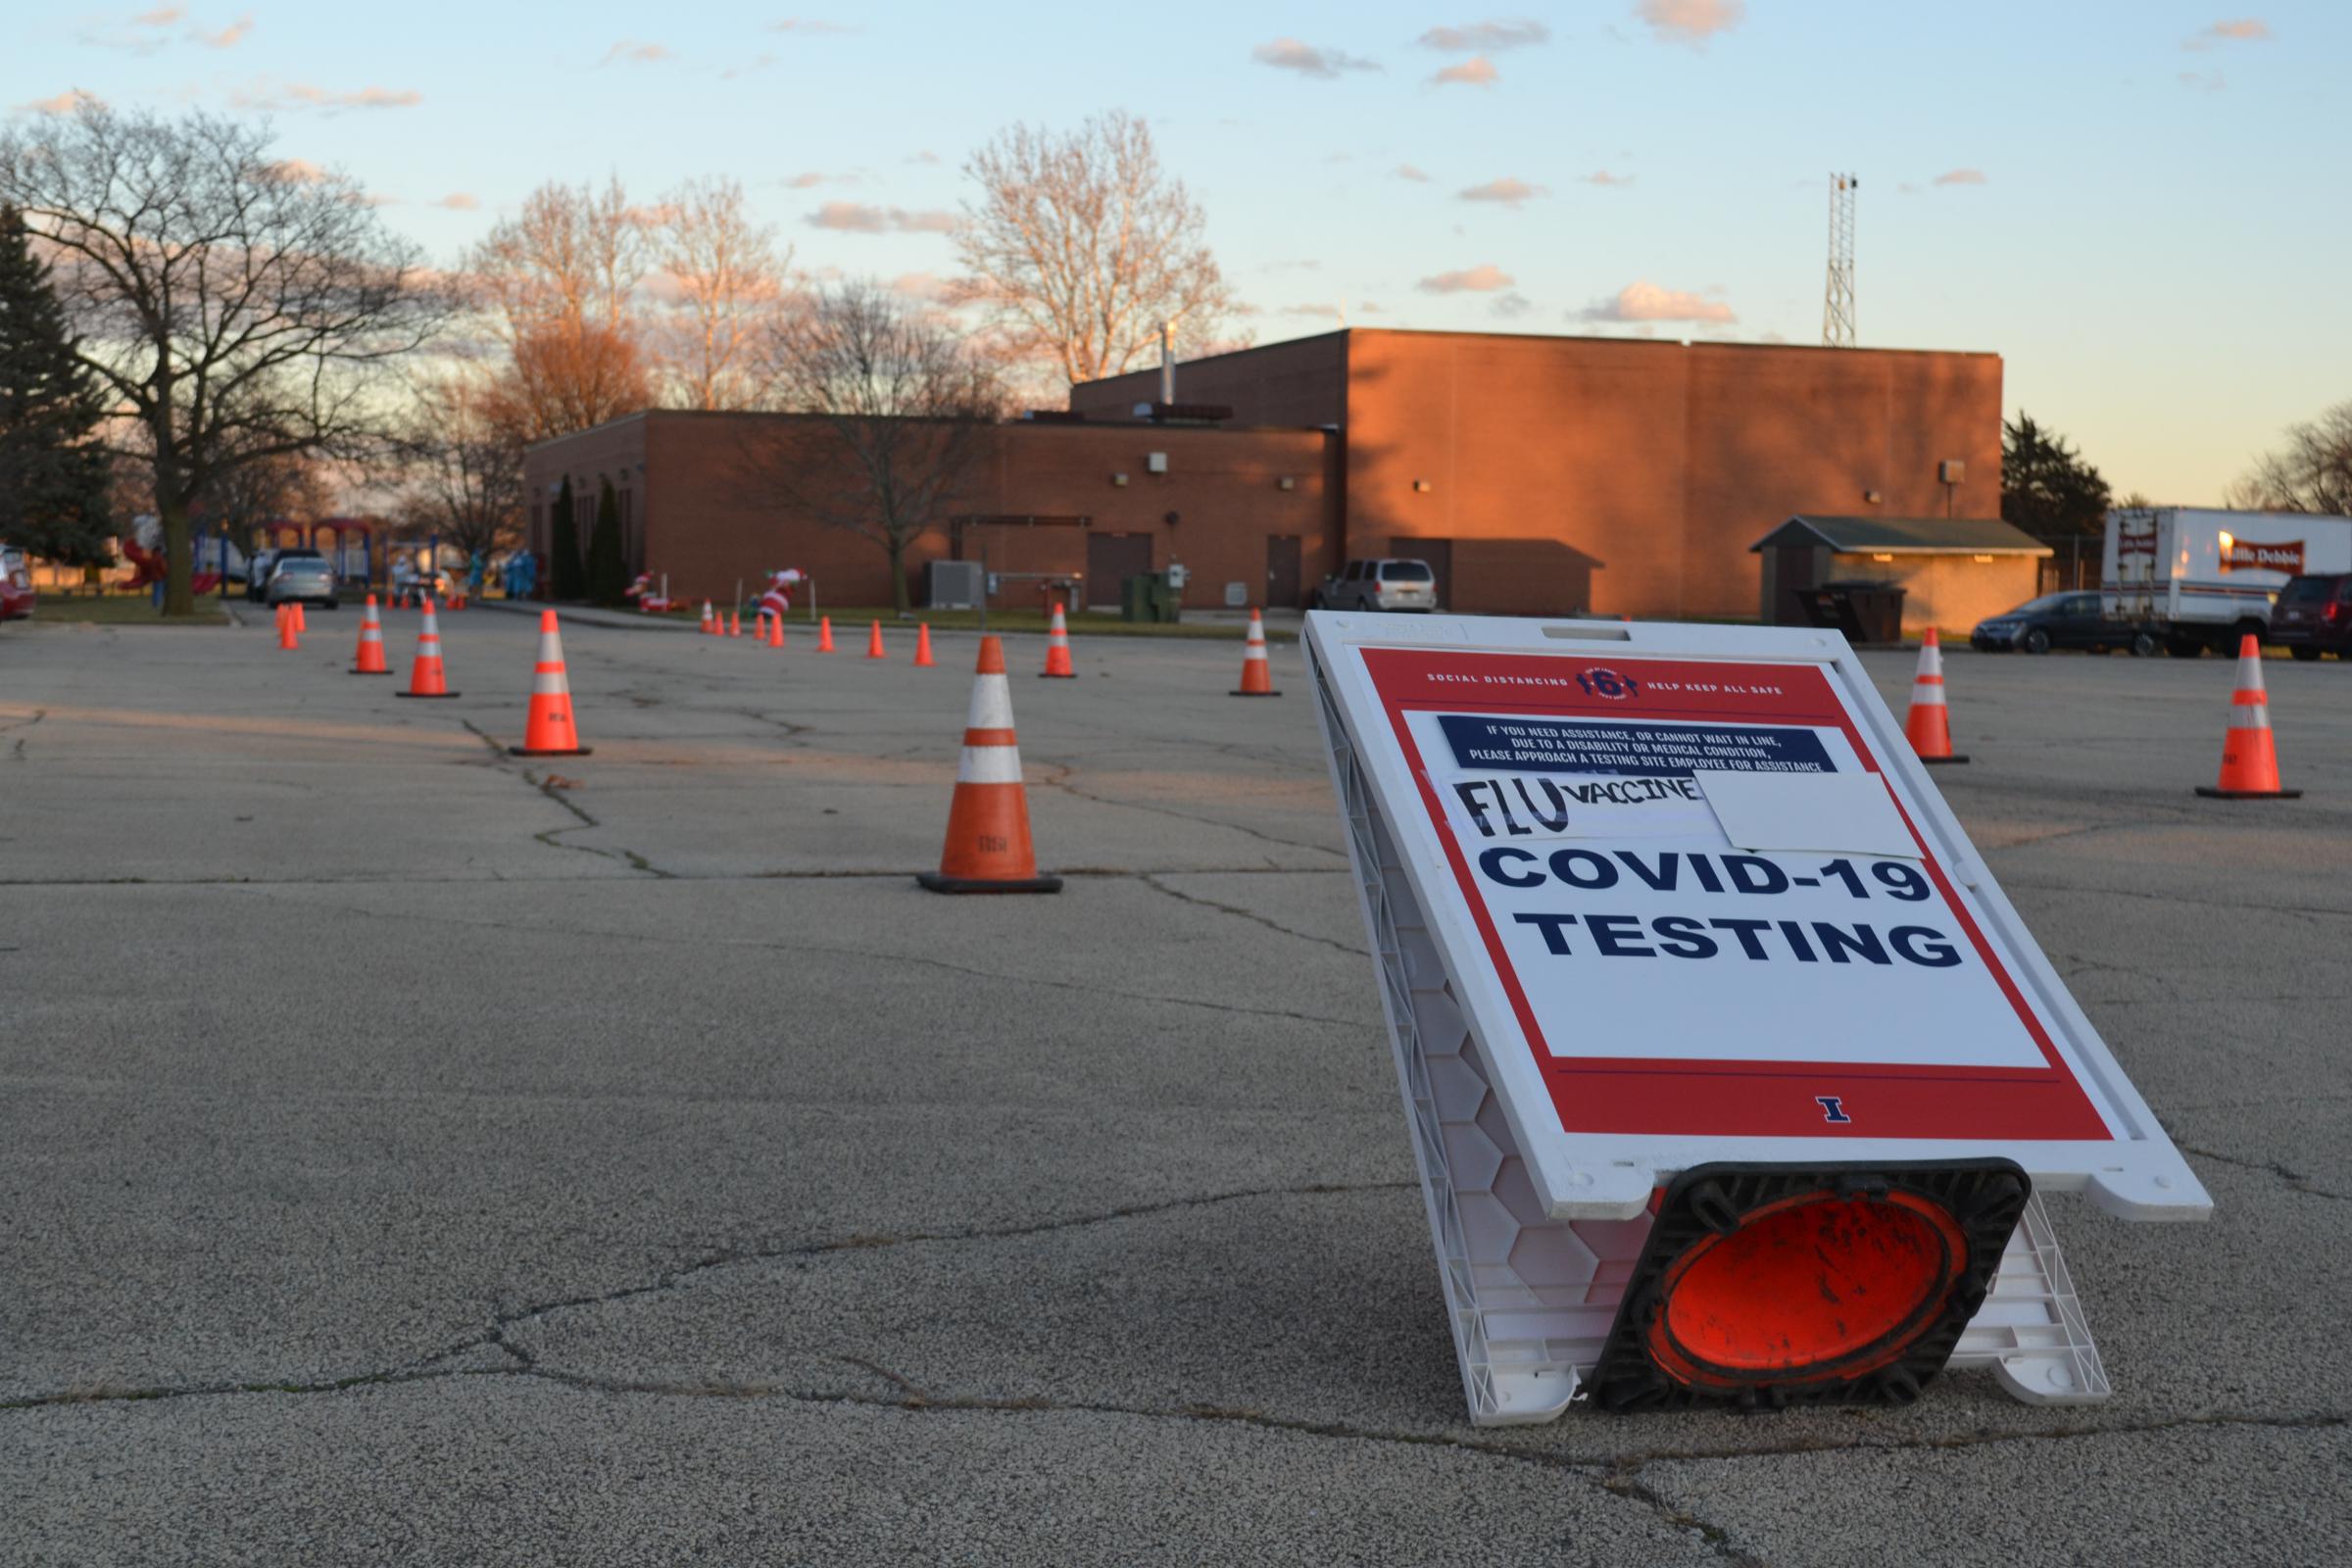 A sign on a traffic cone, tipped over says COVID Tests and Flu Shots is added in black marker. there are several traffic cones in an empty parking lot.